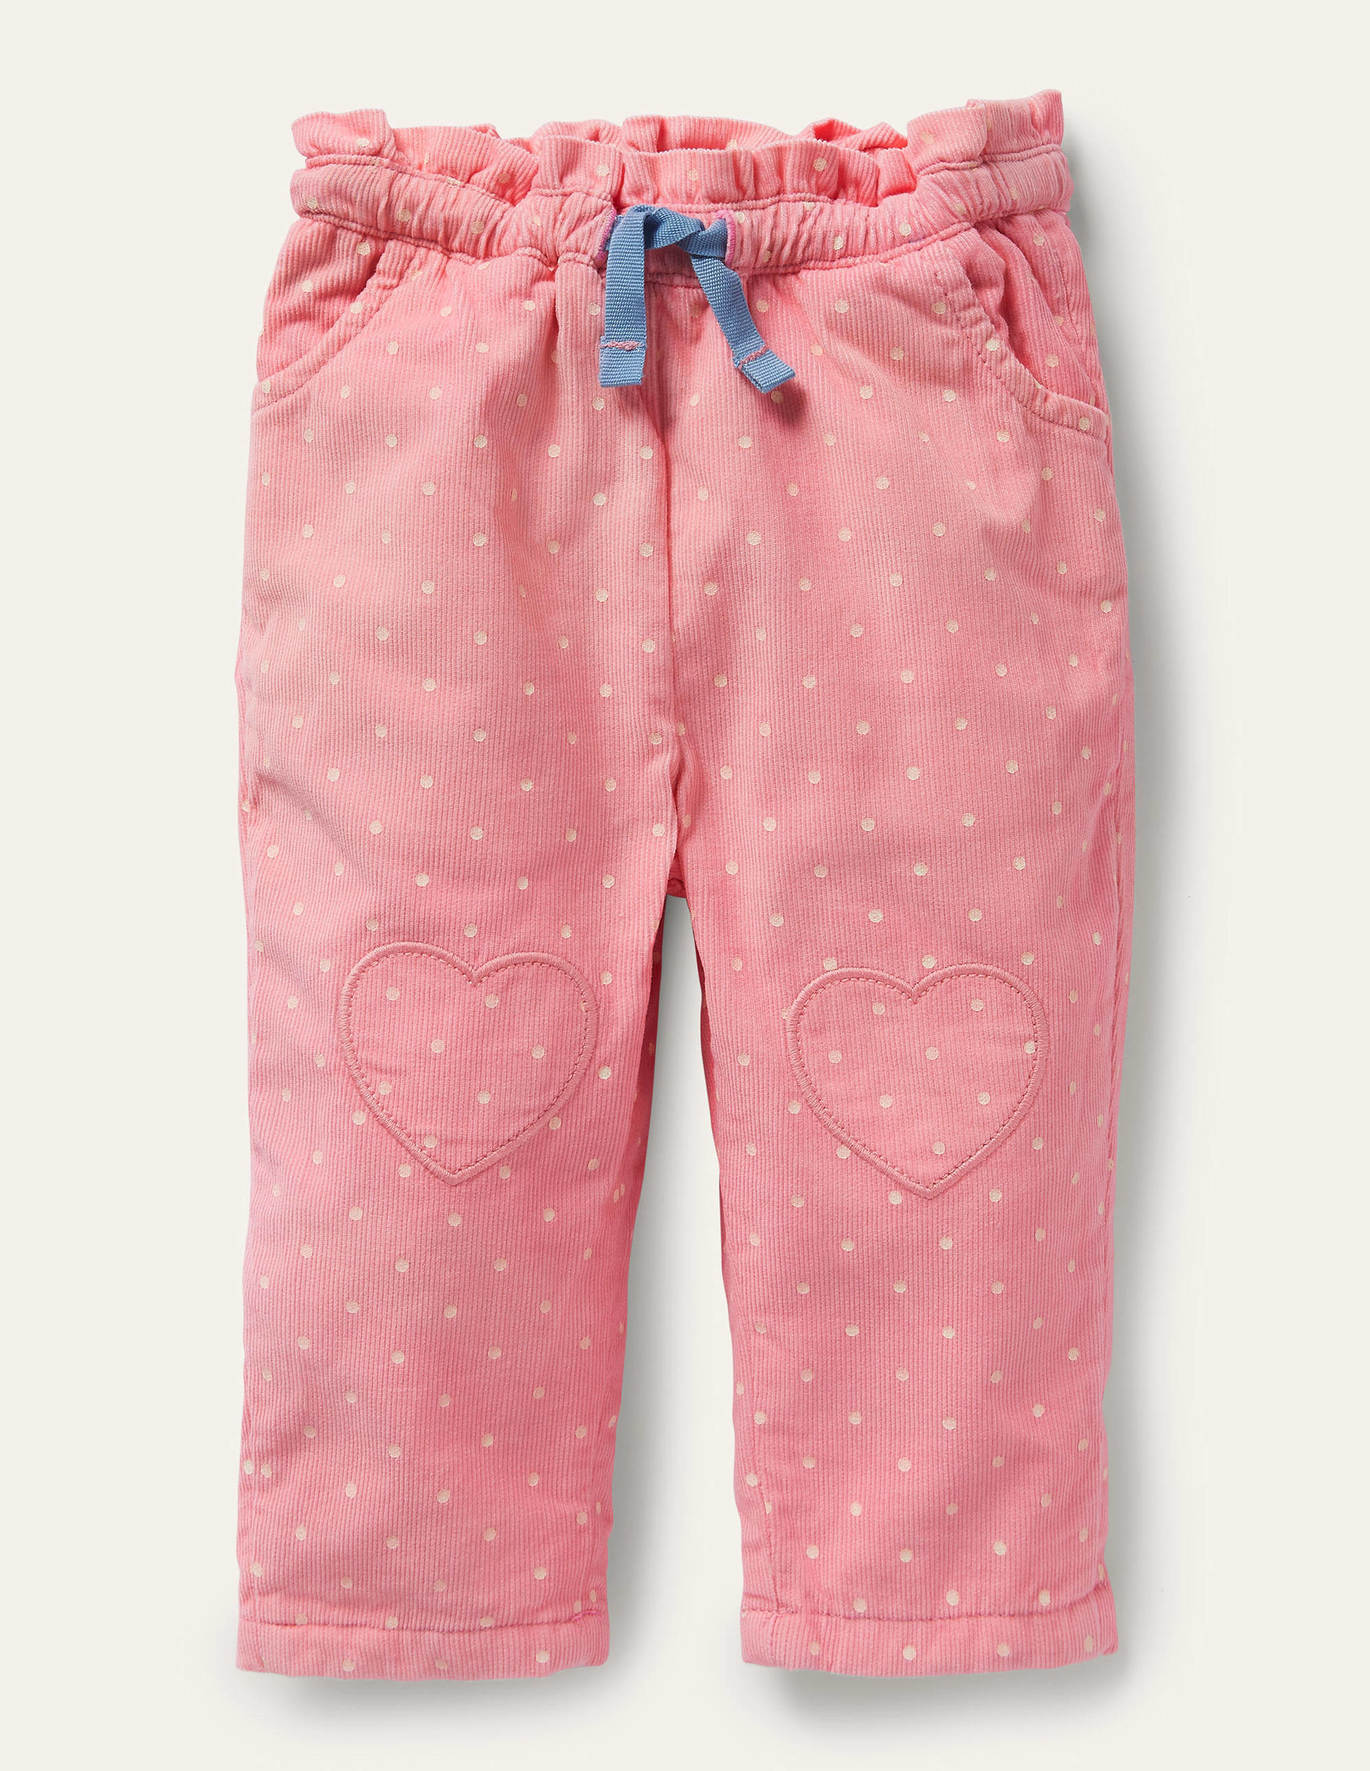 Boden Spotty Cord Pants - Formica Pink